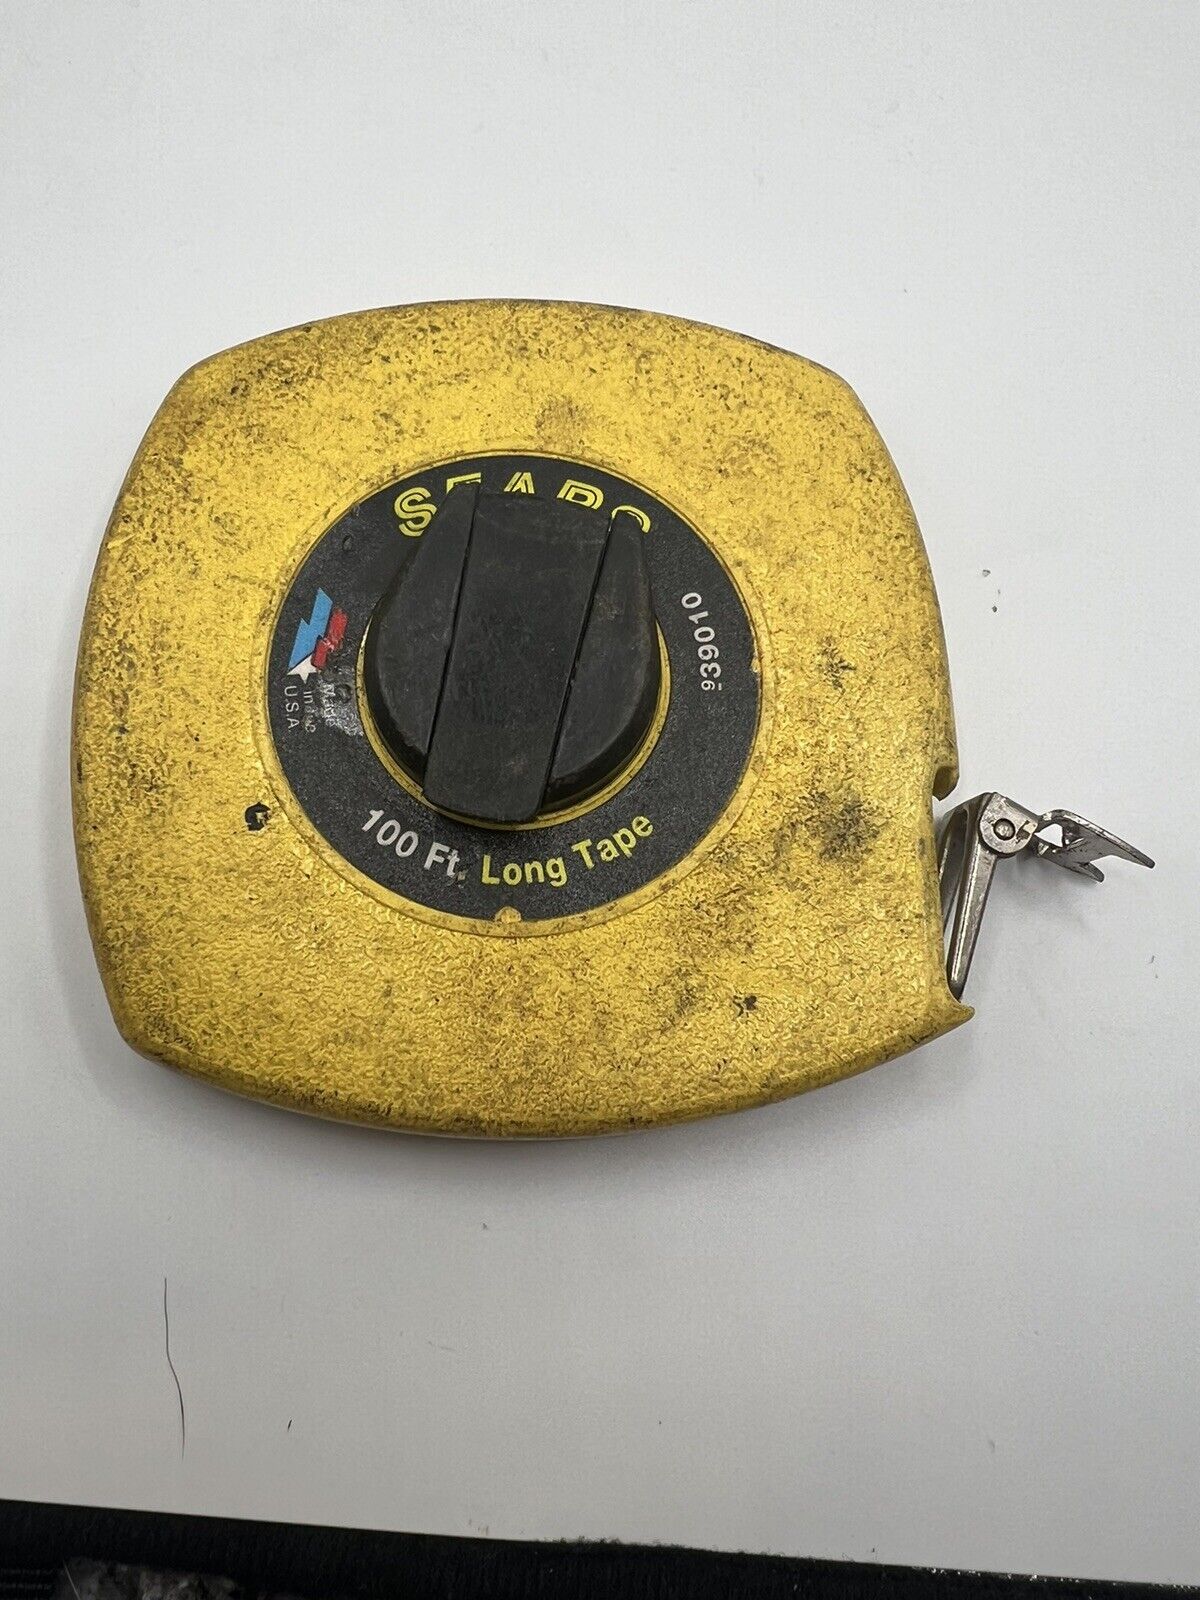 Vintage Sears 100 Ft Long Wind Up Tape Measure Made In USA. Construction Work